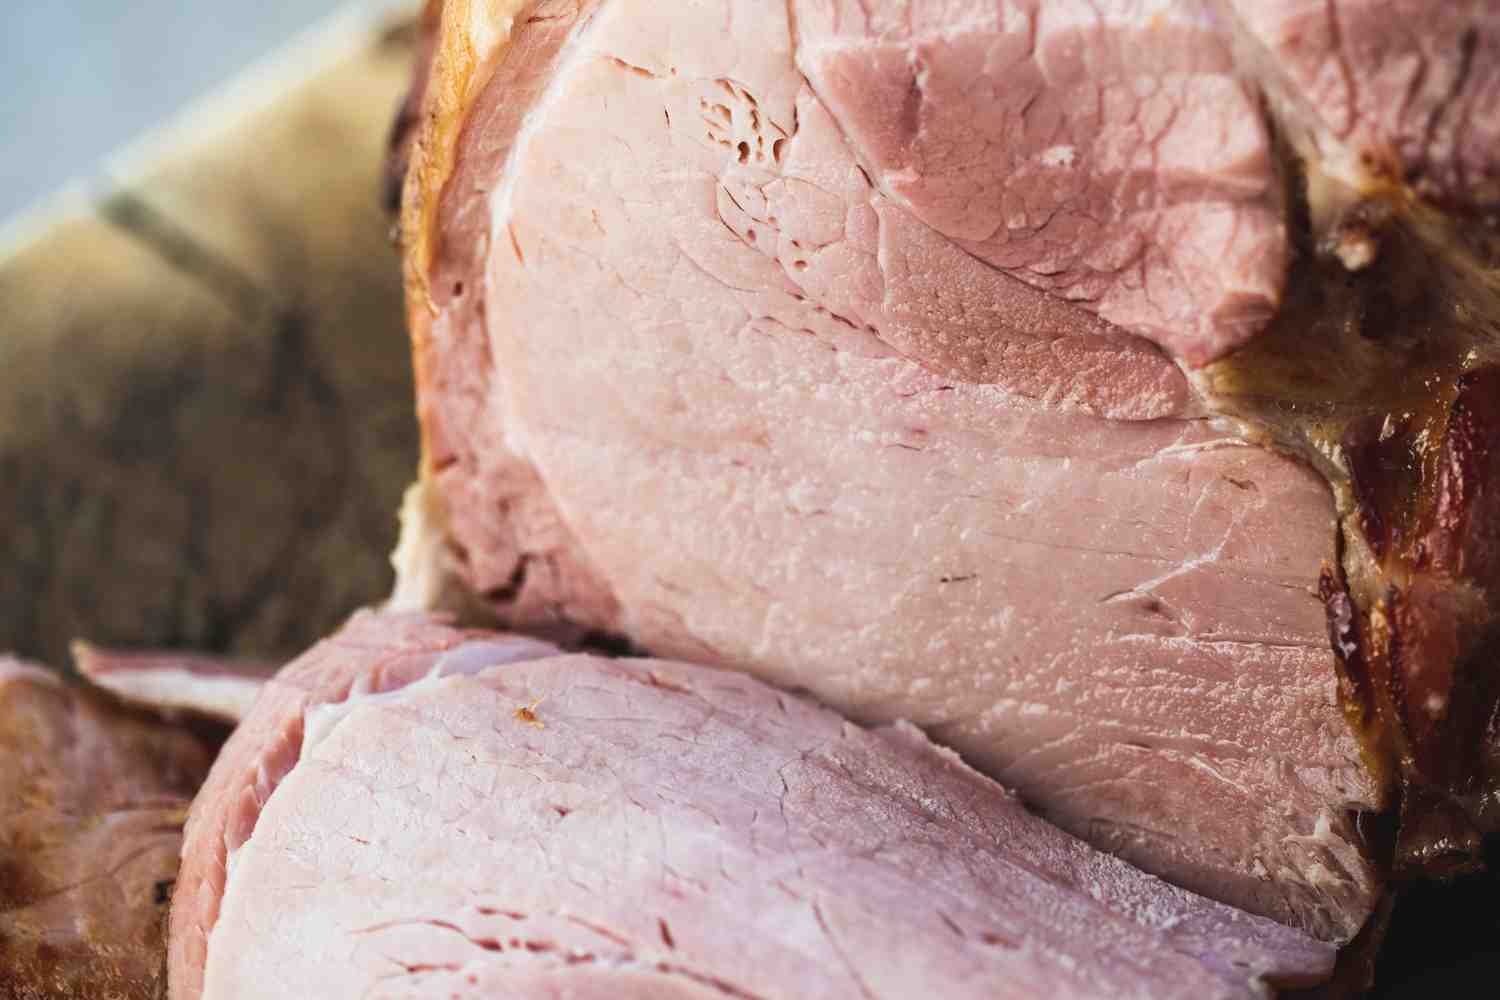 How do you know if cooked ham is bad?